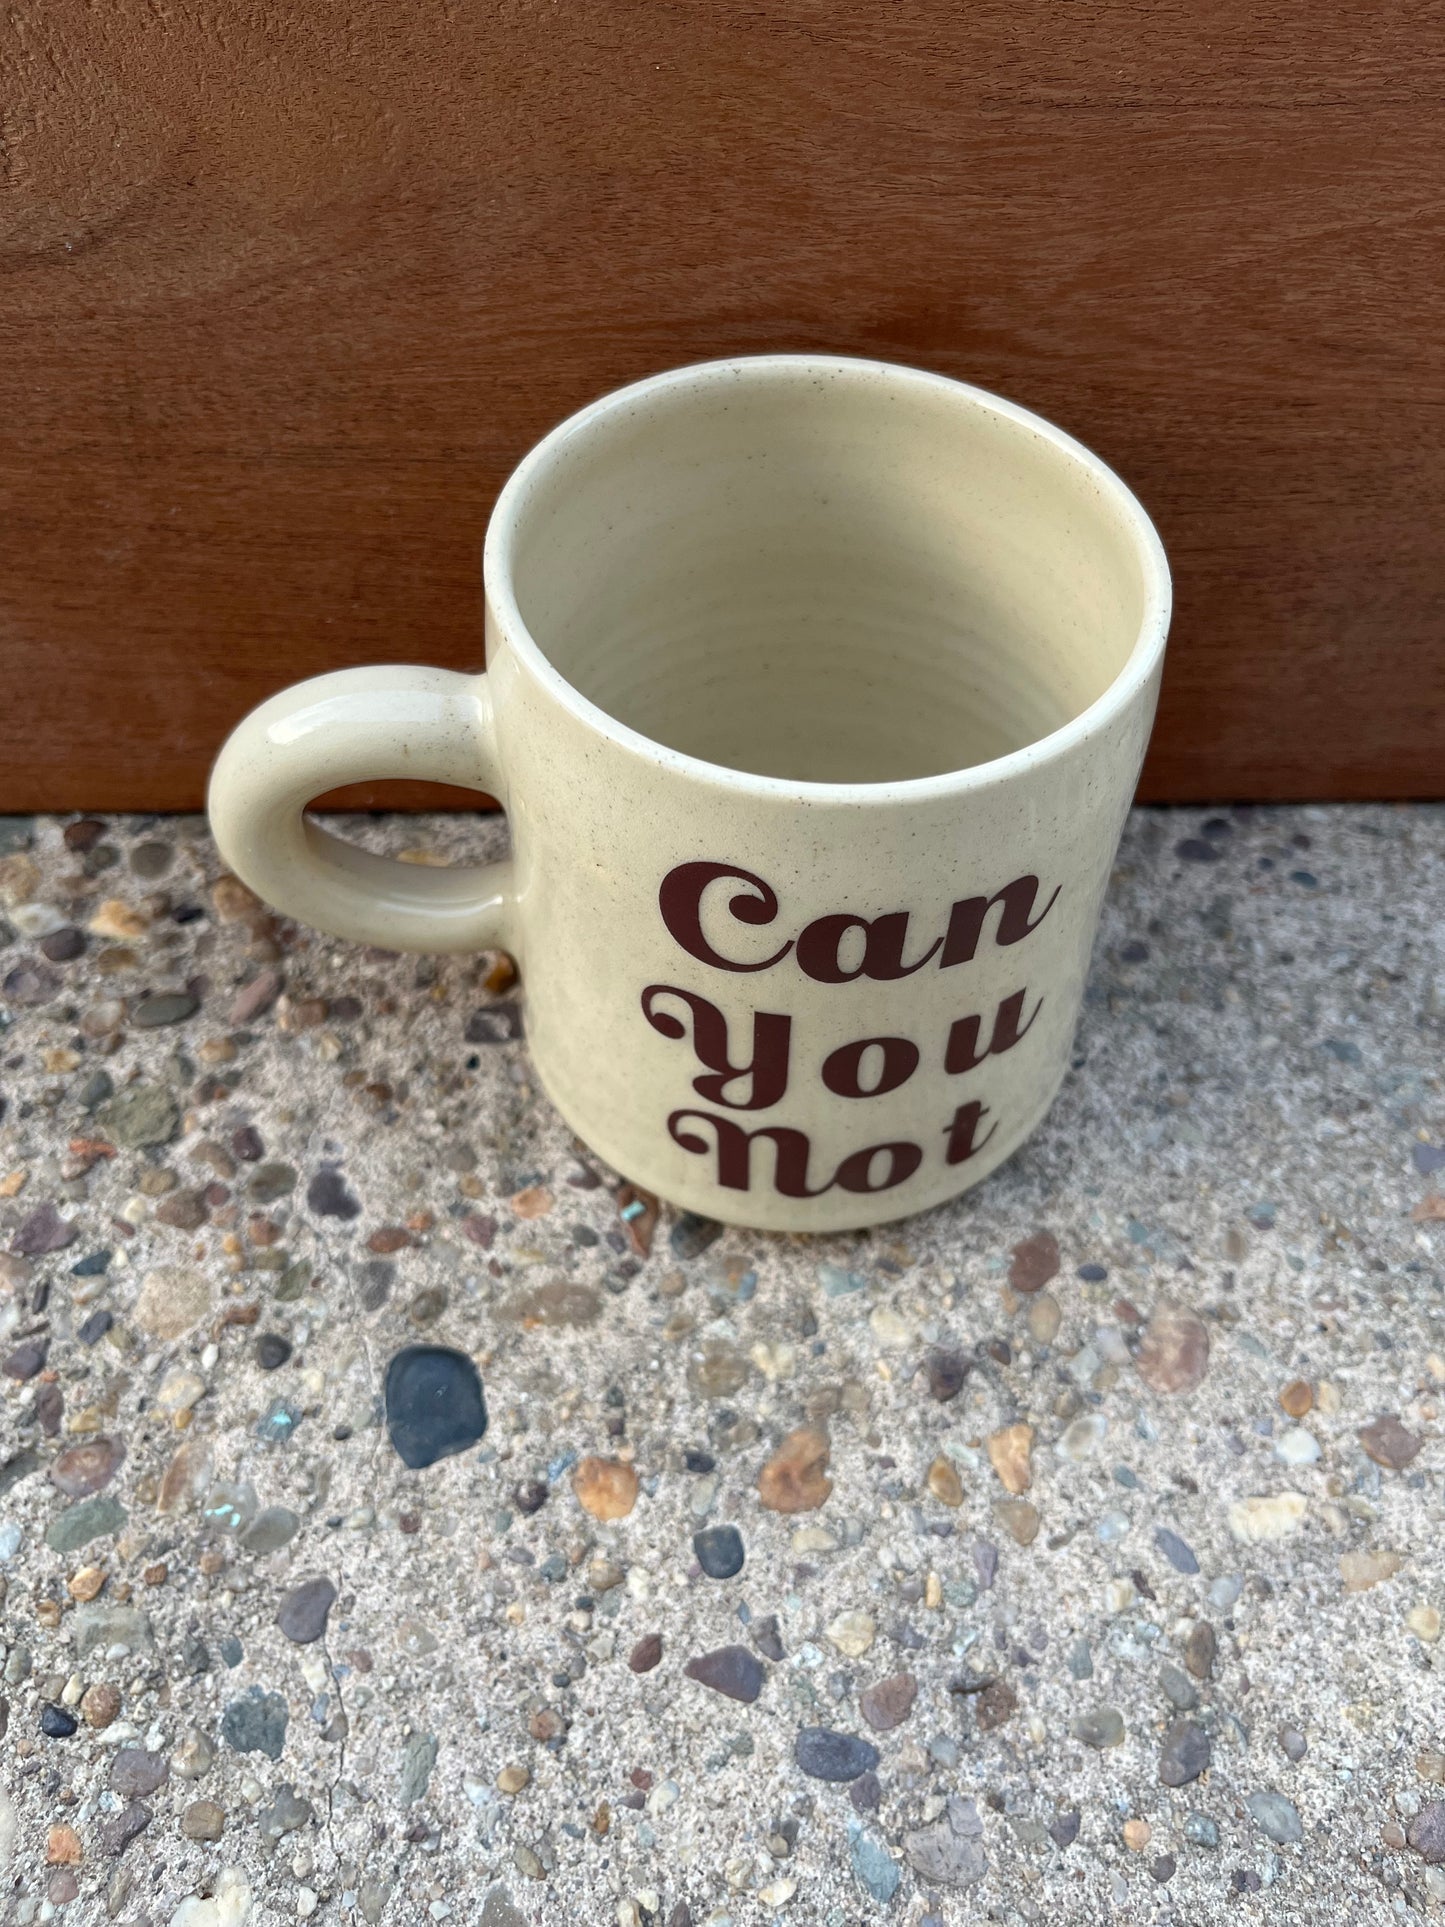 Mid-Century Mug :: Can You Not